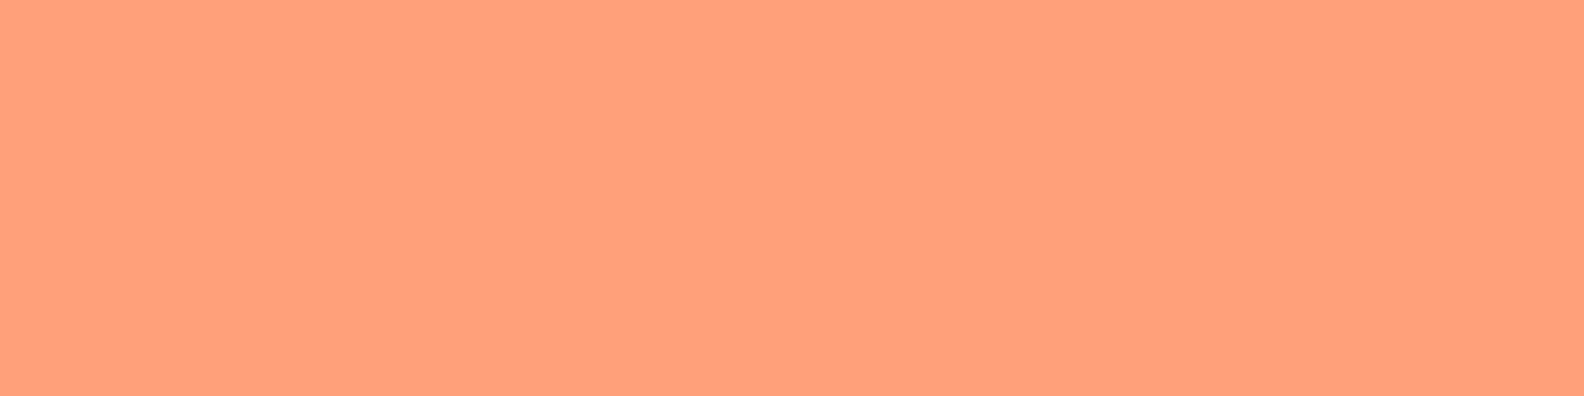 1584x396 Light Salmon Solid Color Background